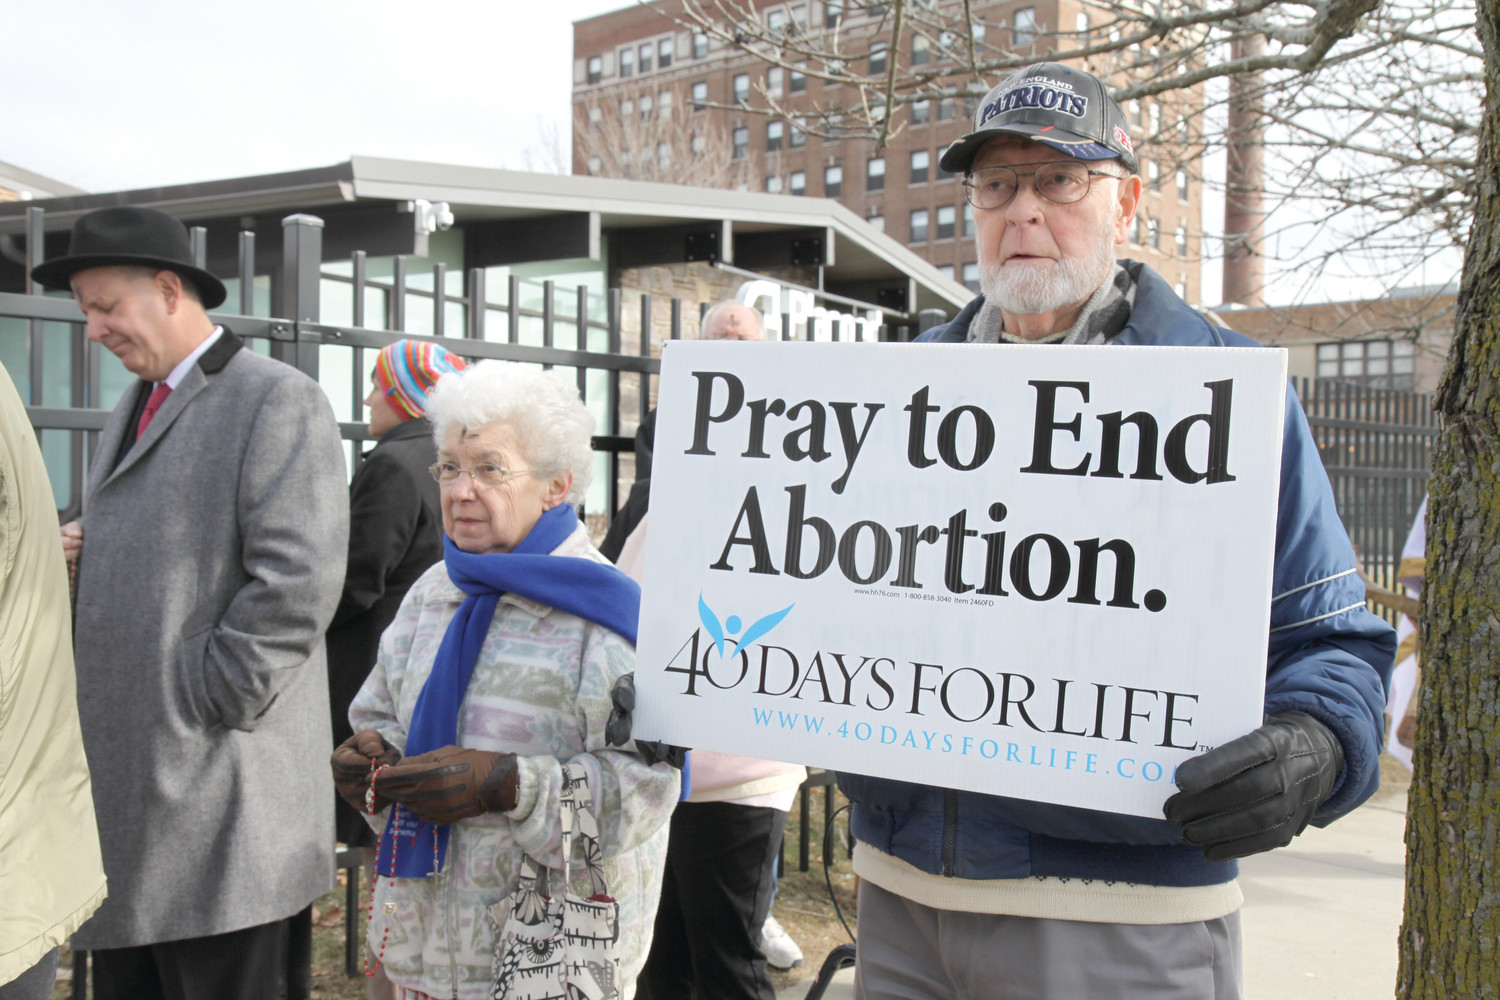 Arthur and Connie Boisse joined other Catholics outside the Providence Planned Parenthood clinic last Wednesday.